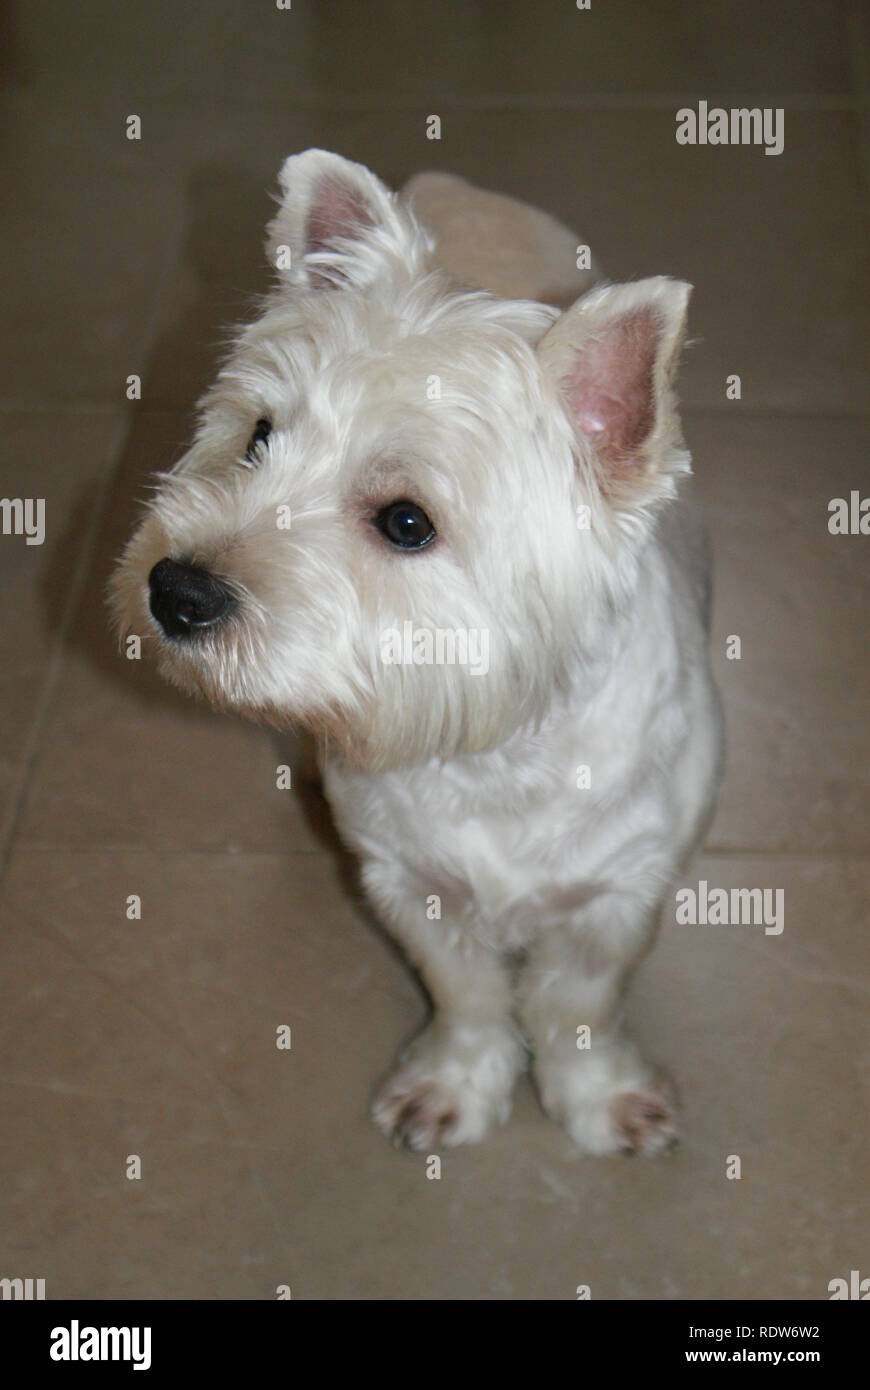 West highland white terrier funny legs stance portrait Stock Photo